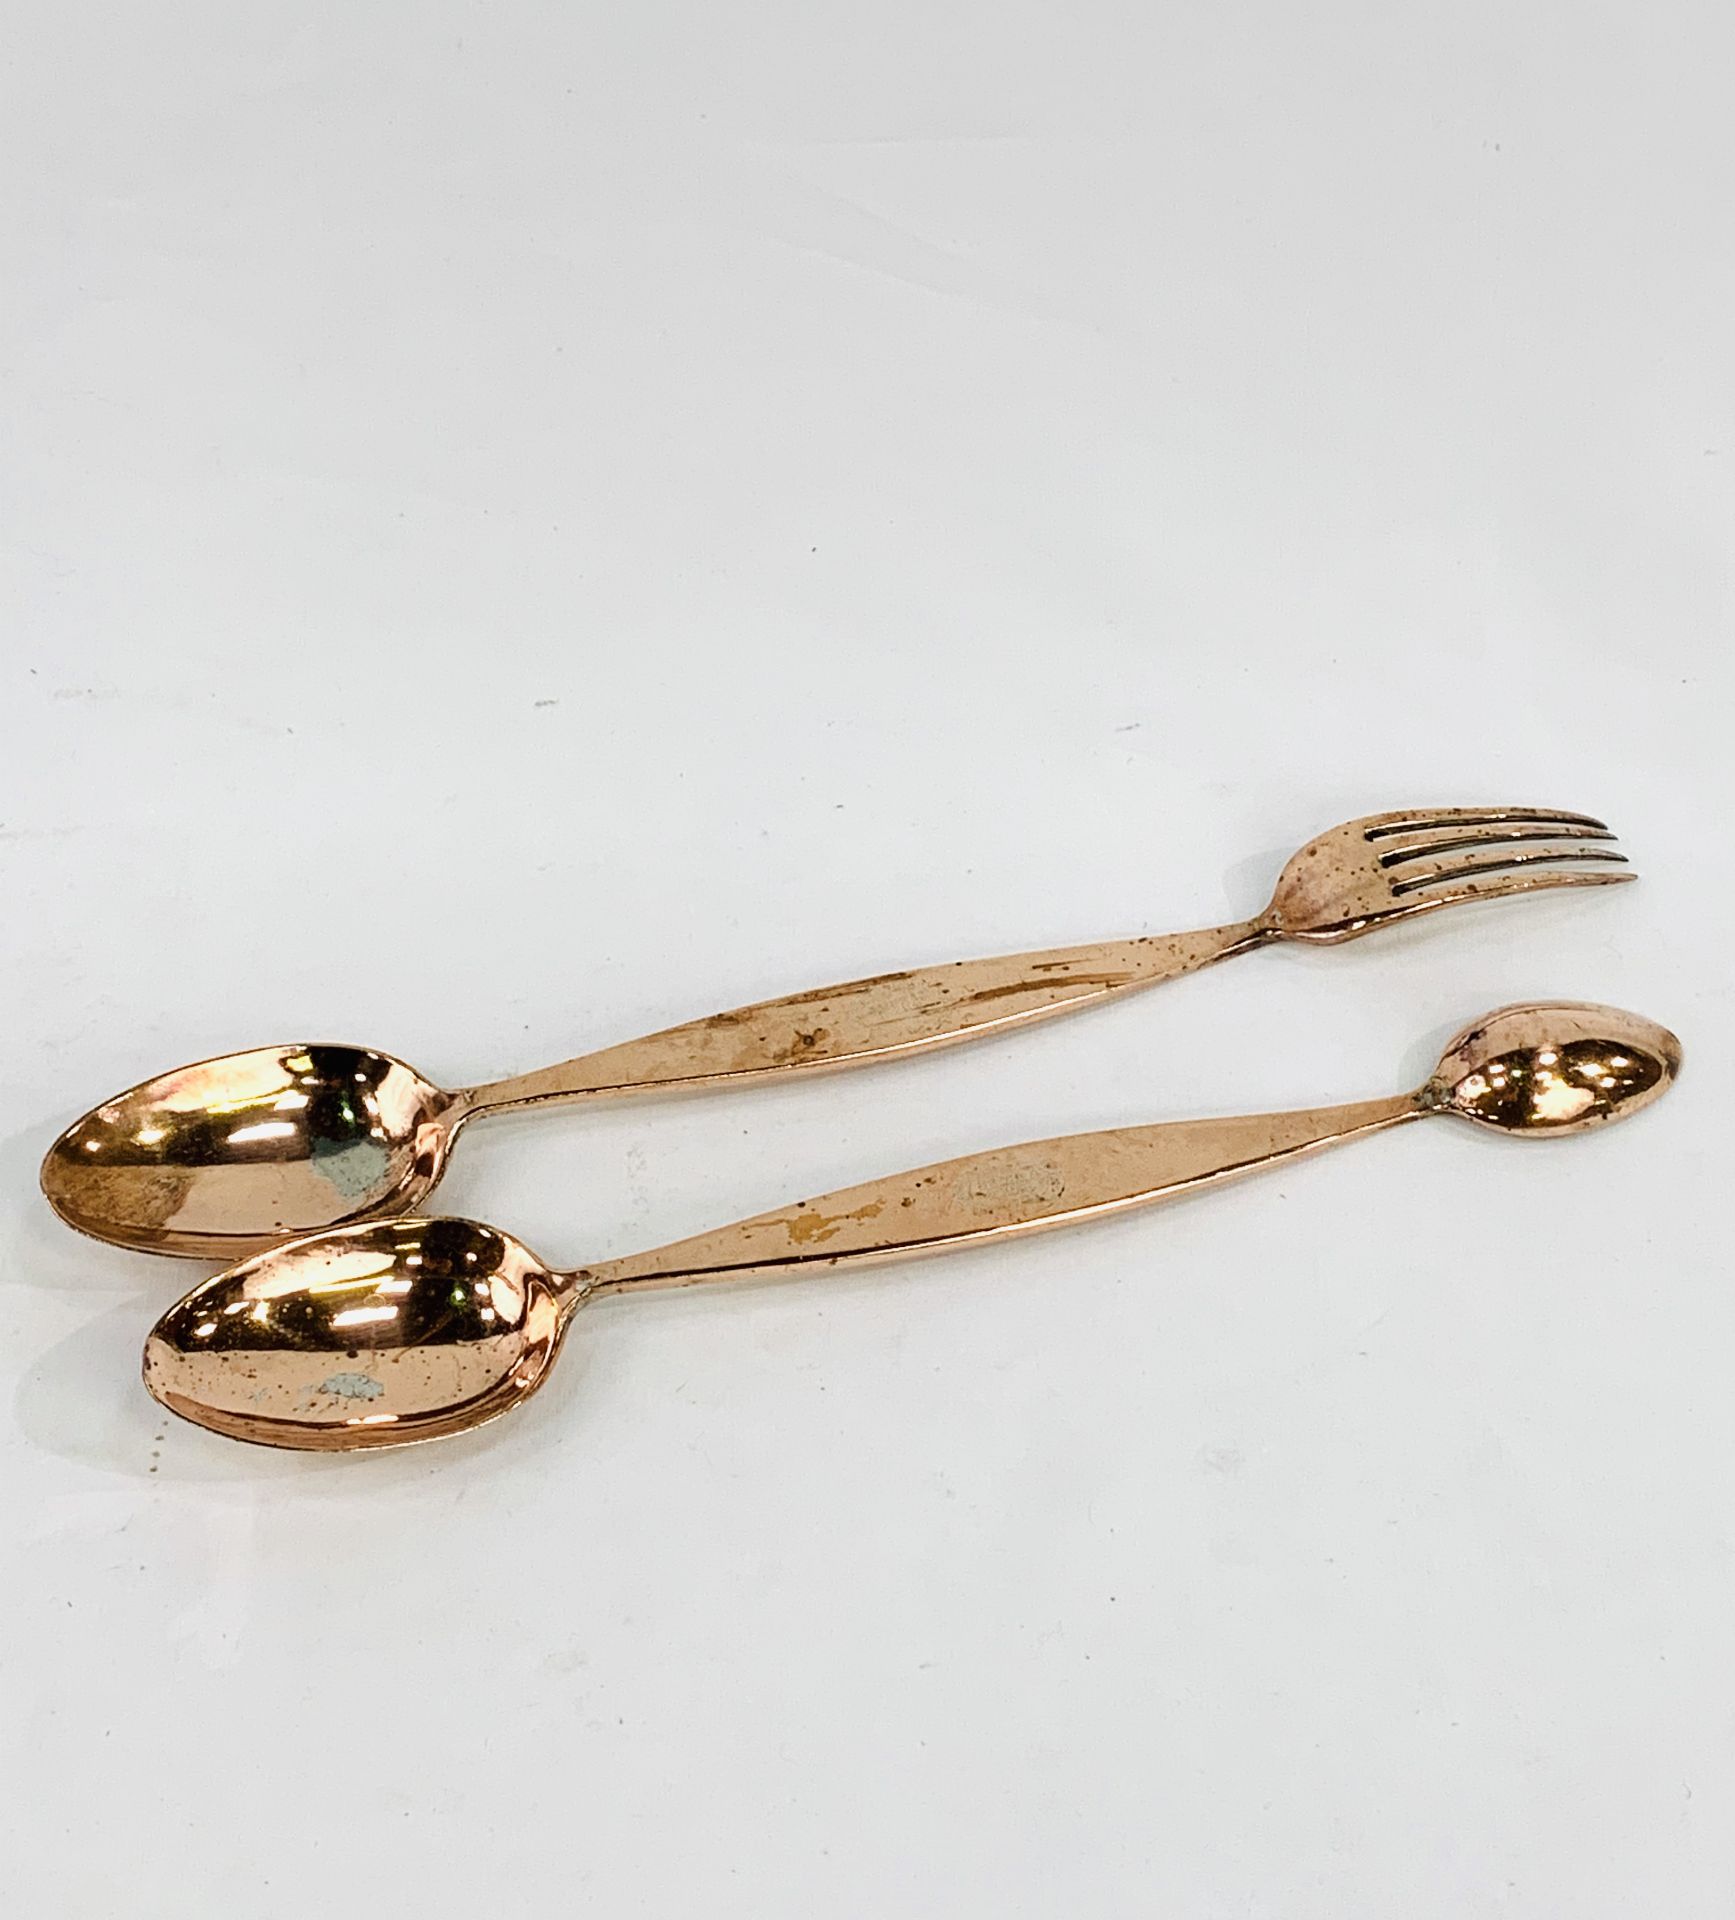 Two copper Benham and Son's serving utensils, marked with a crown and initals RY.